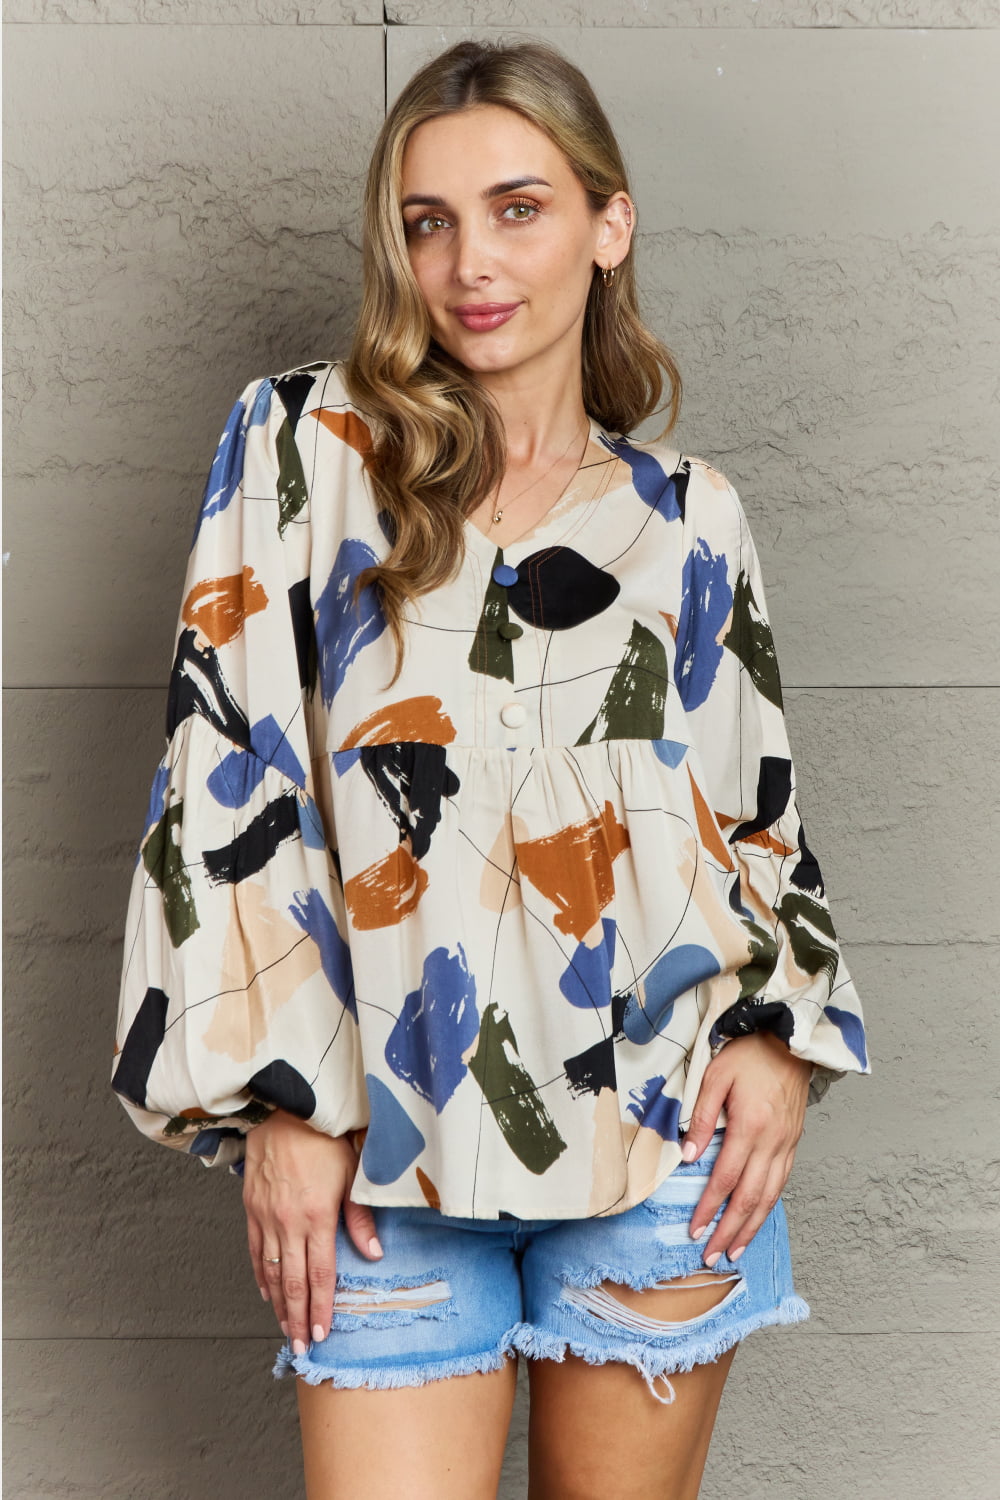 Women’s Hailey & Co Wishful Thinking Multi Colored Printed Blouse